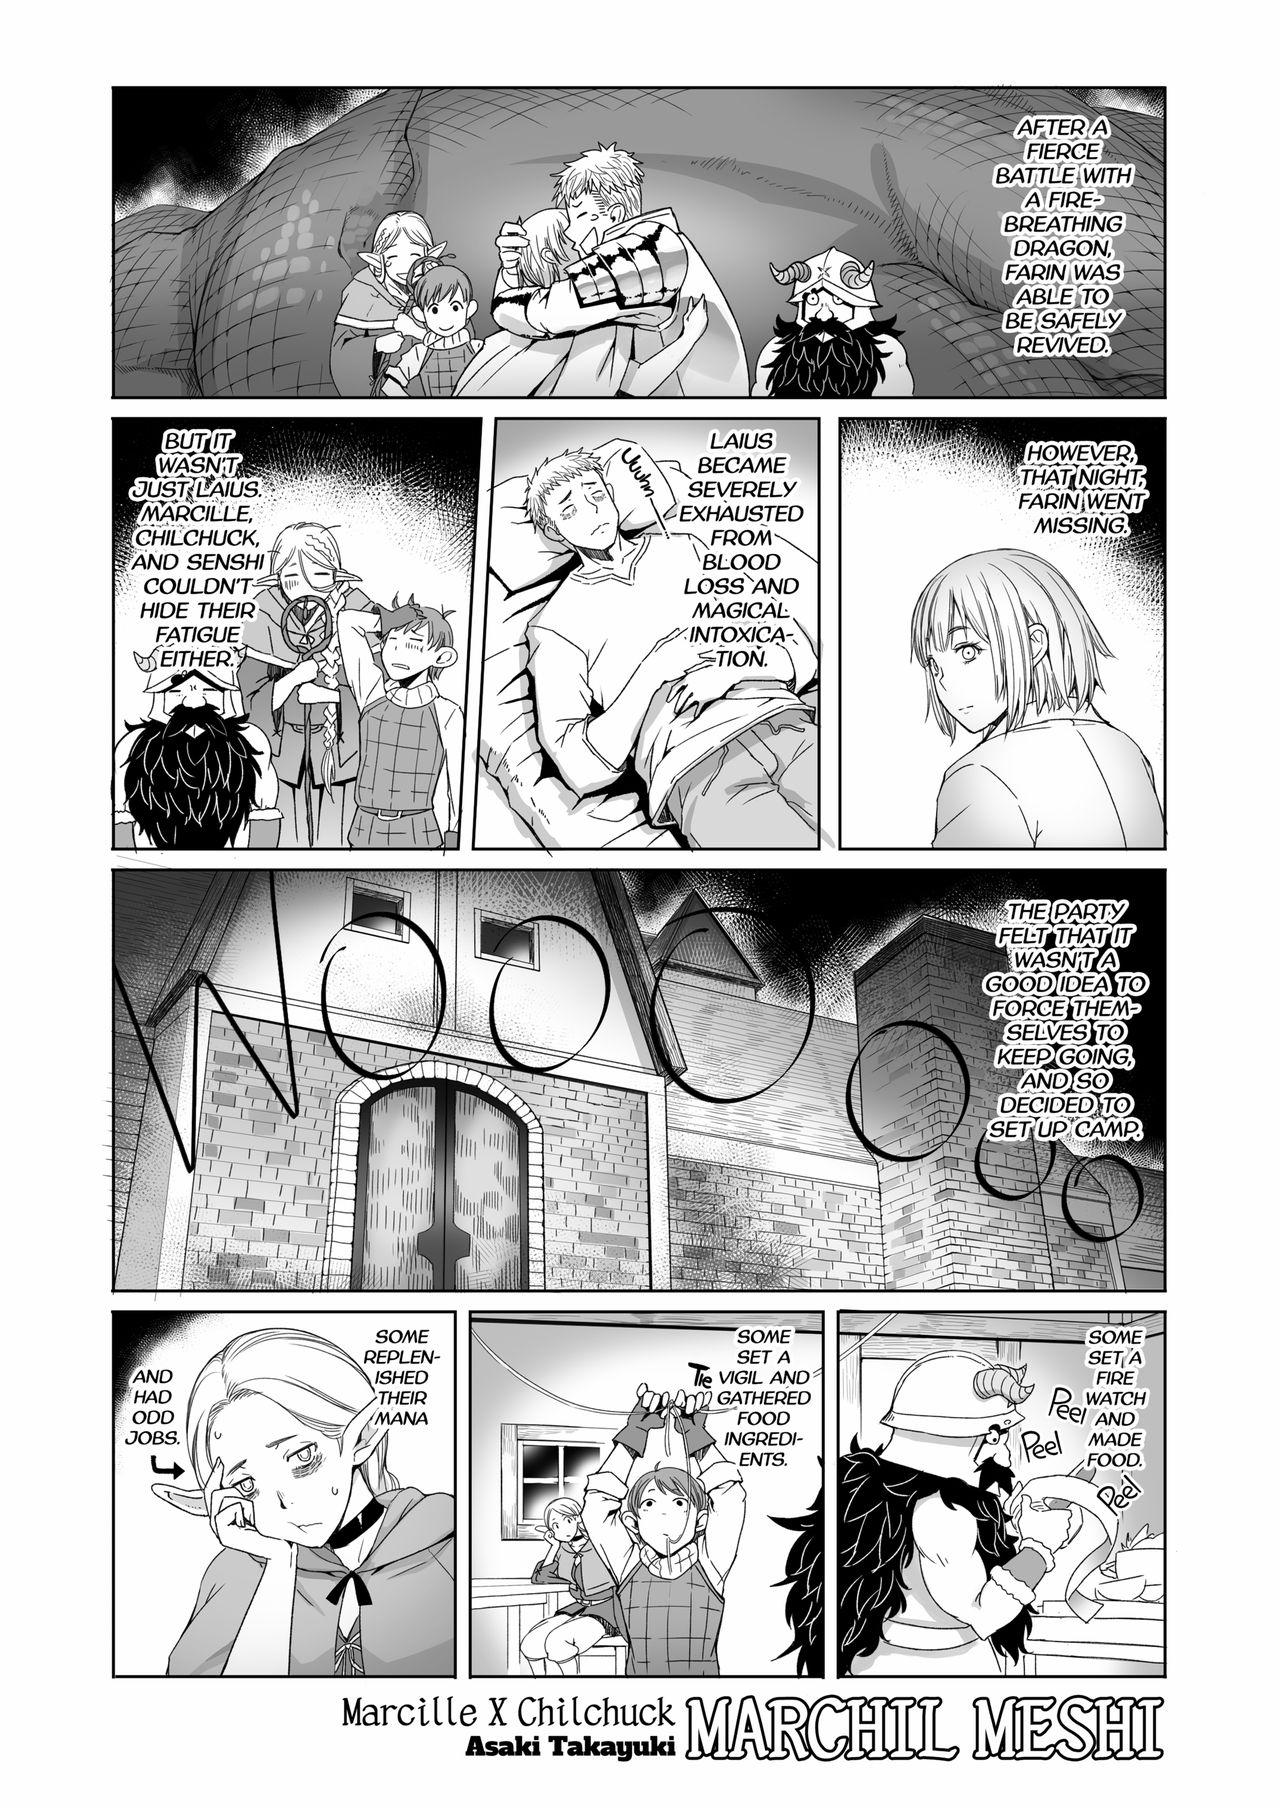 Hot Cunt Marchil Meshi - Dungeon meshi Dyke - Page 2